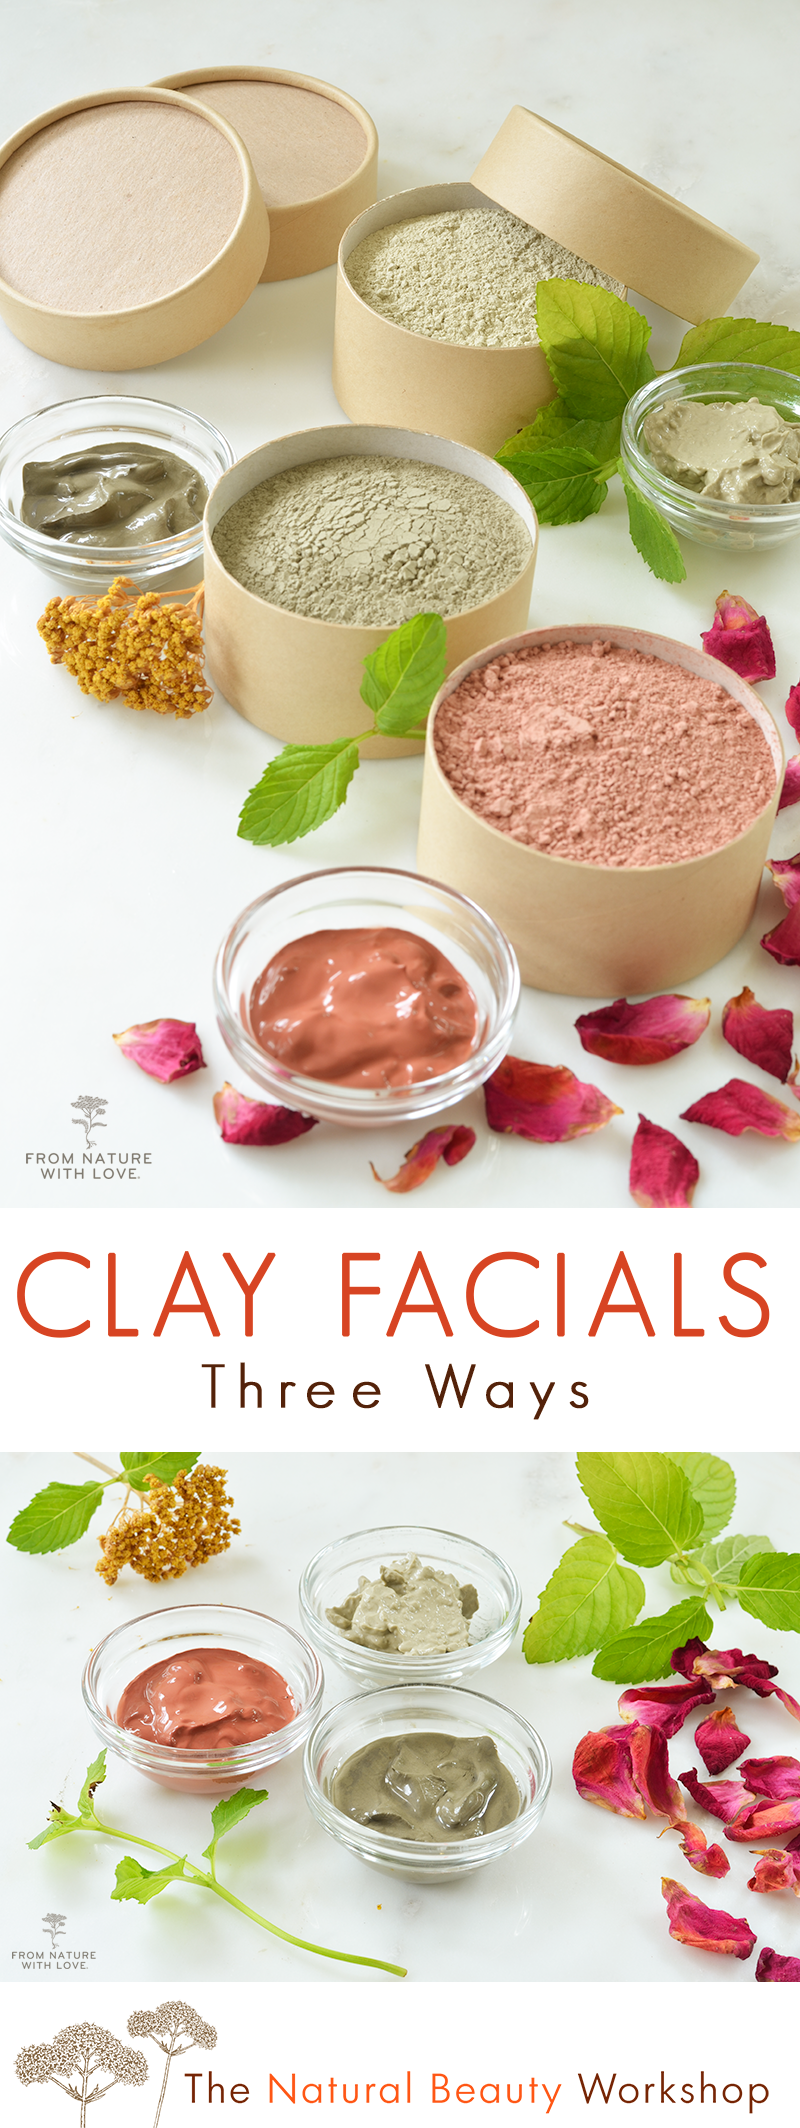 Make Your Own Clay Facial Masks - Three Easy Recipes to Get Started -   18 beauty Mask ideas